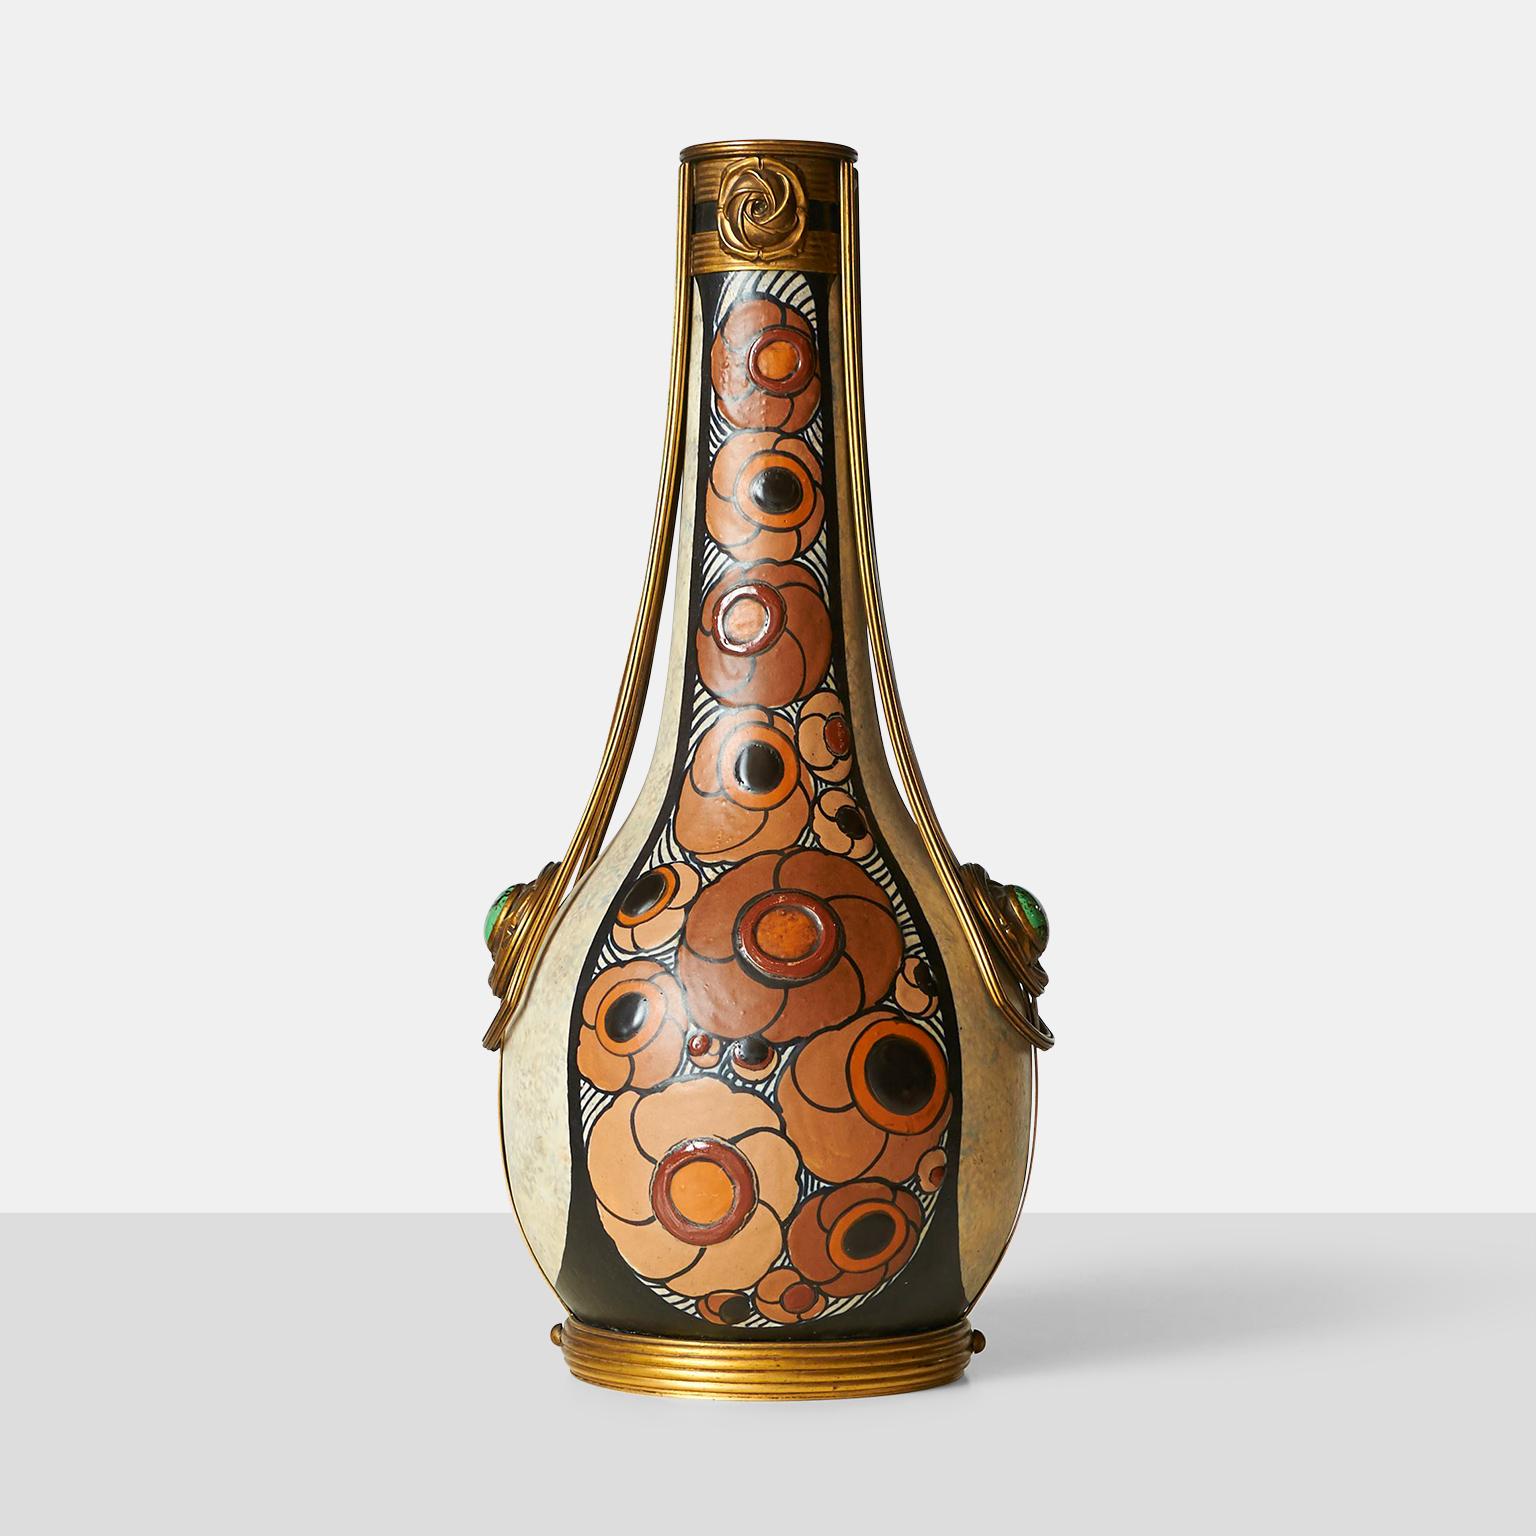 An Art Deco ovoid-shaped stoneware vase enameled bluish-beige with orange brown and black floral motifs by French sculptor Luis Auguste Dage. Gilded bonze mounting adorned with green cabochons. Signed 